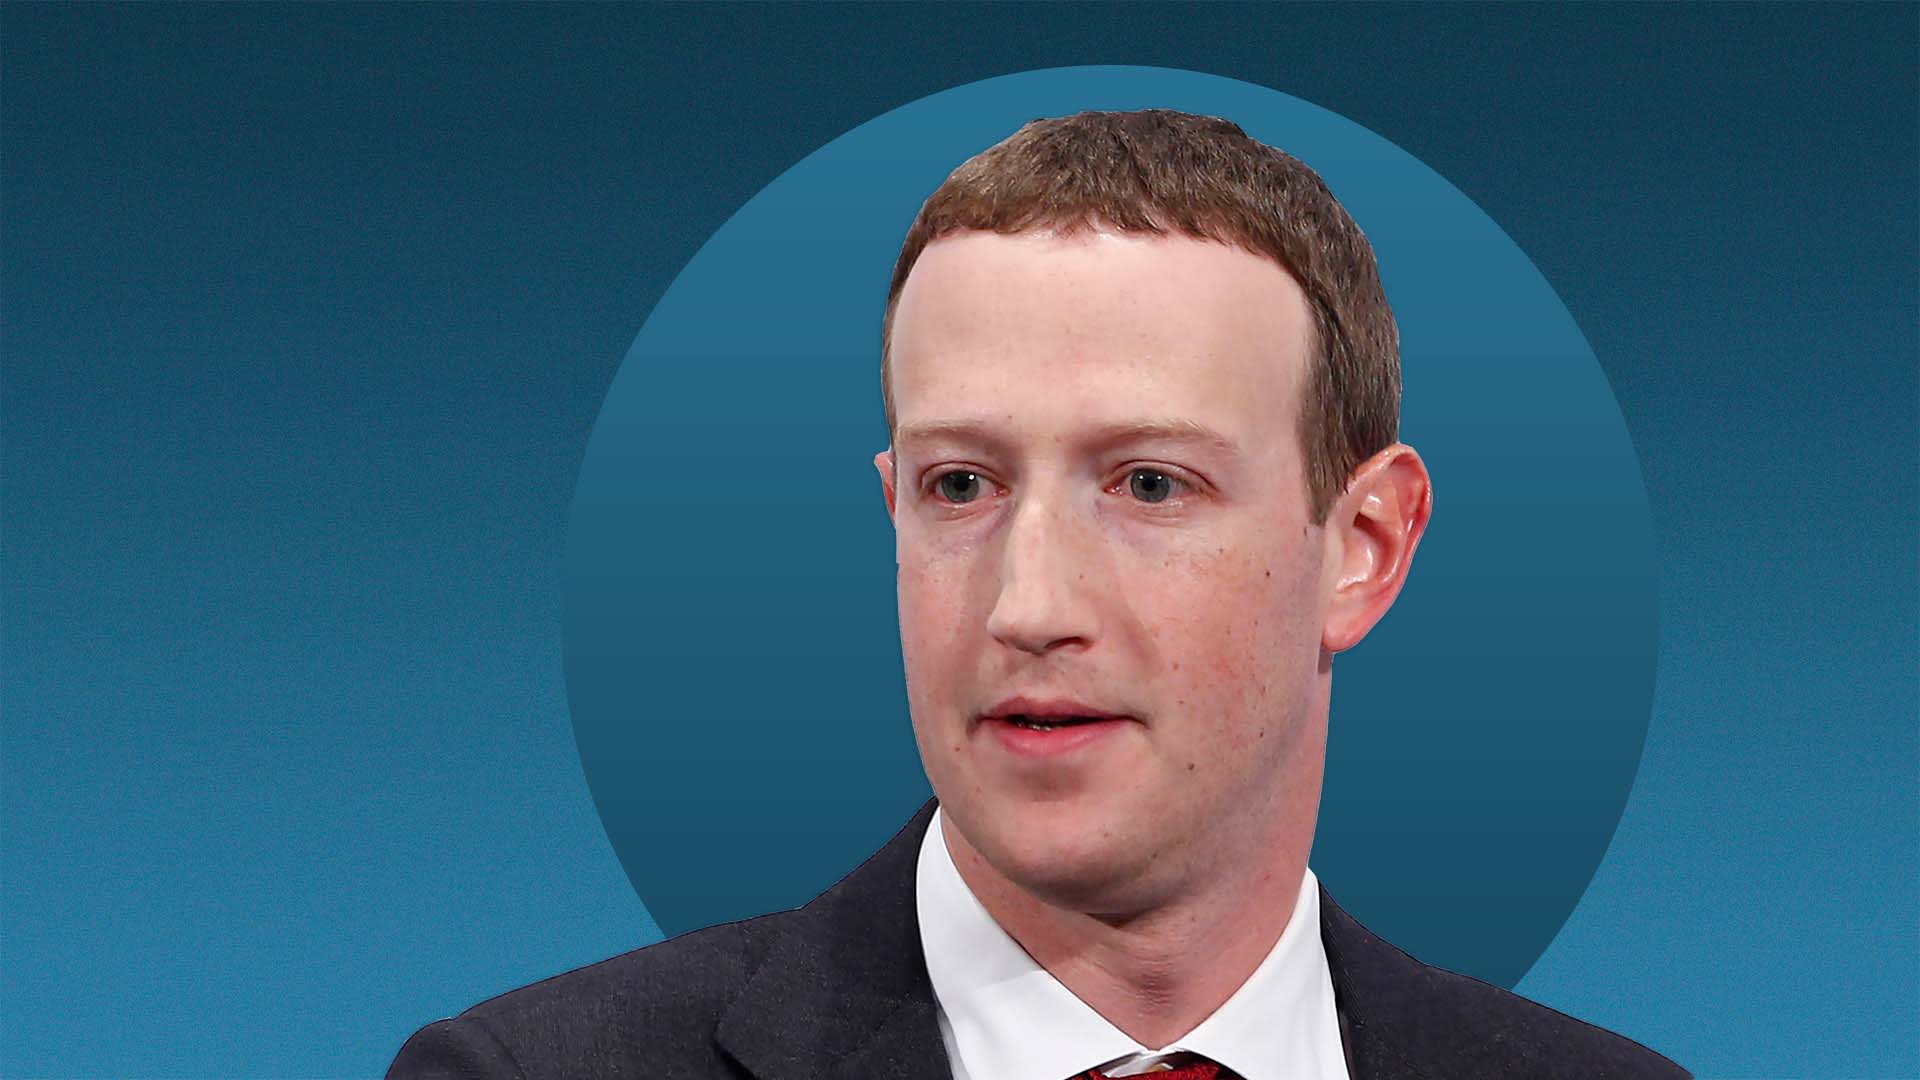 Mark Zuckerberg Just Made a Huge Mistake. It Could Destroy Meta and Facebook